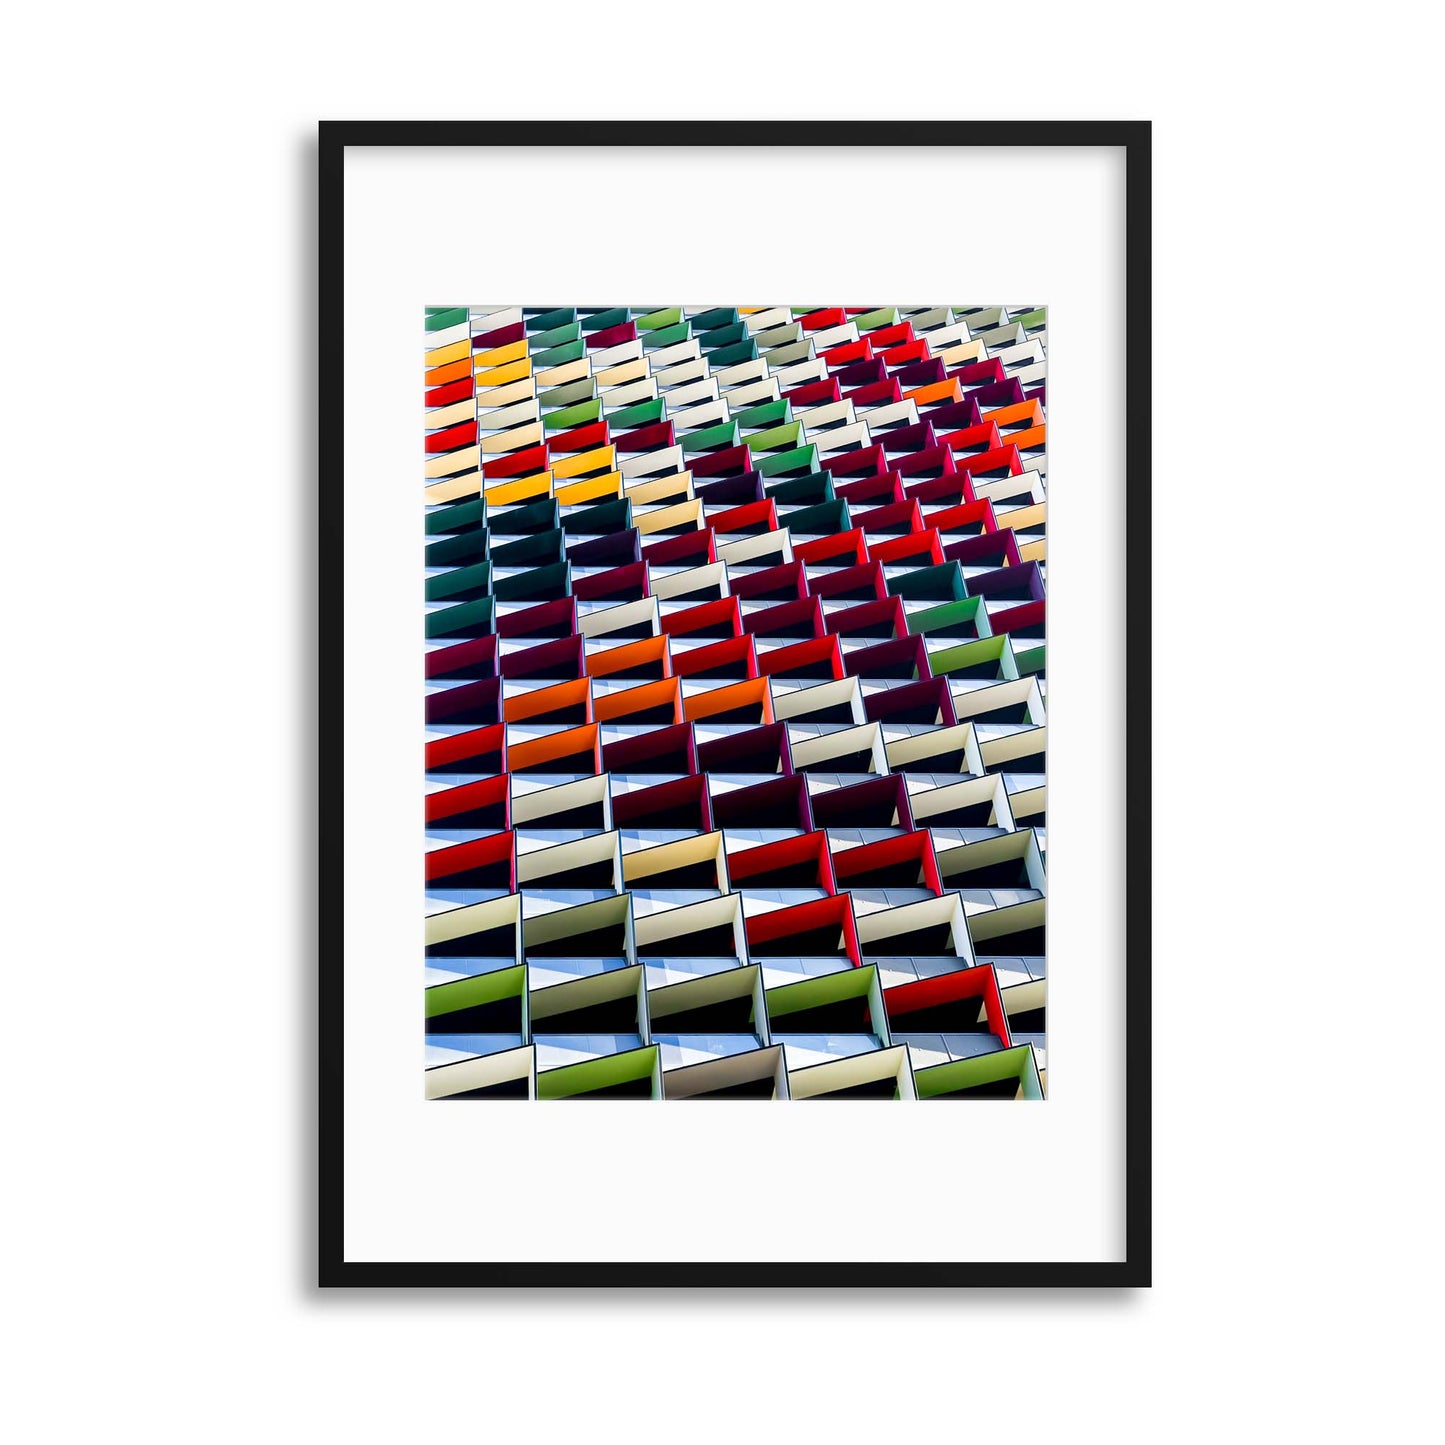 Origami by Jared Lim Framed Print - USTAD HOME